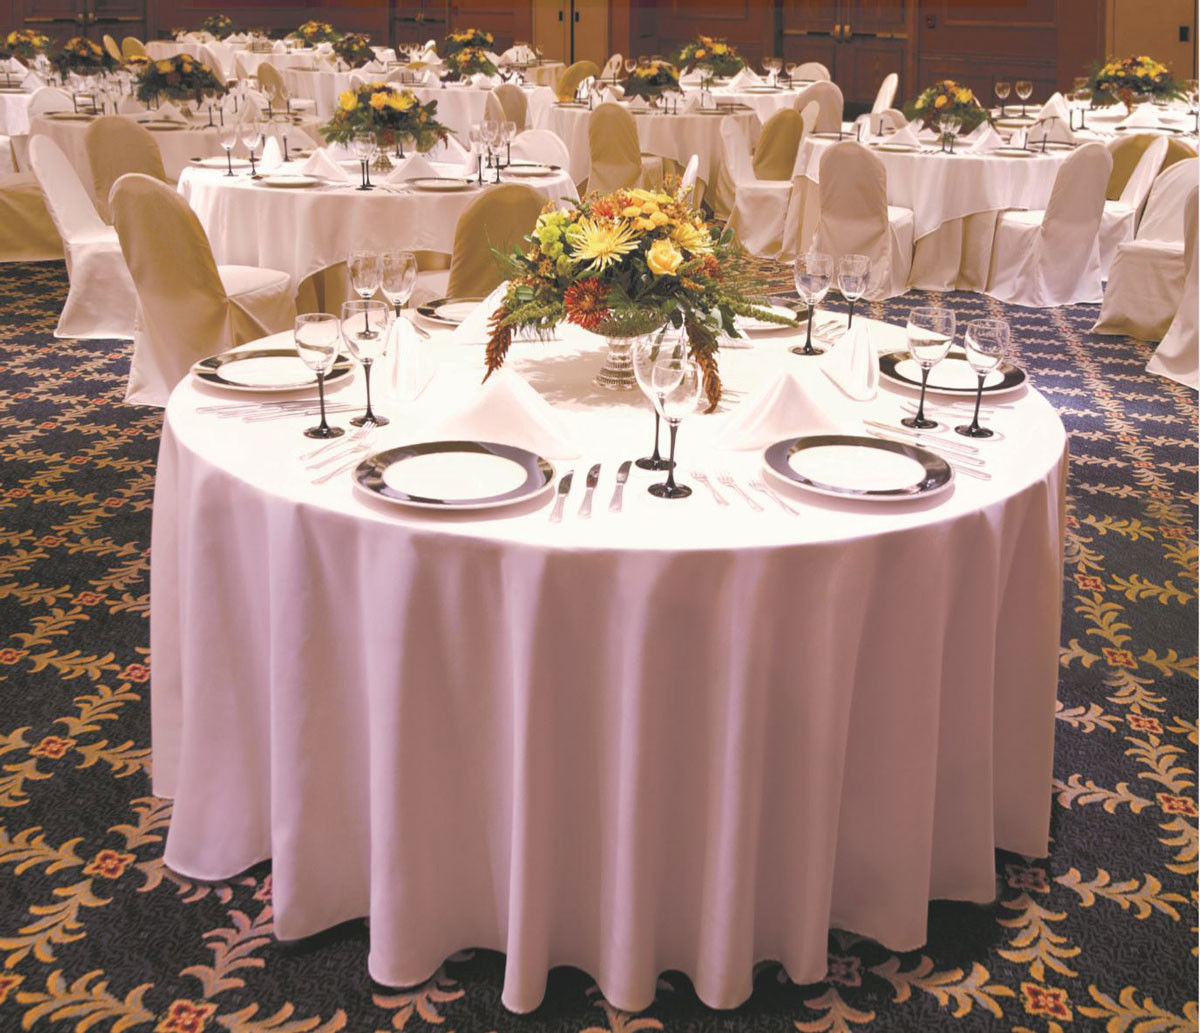 What unique properties does the 132 inch round tablecloth from Milliken Horizon have?